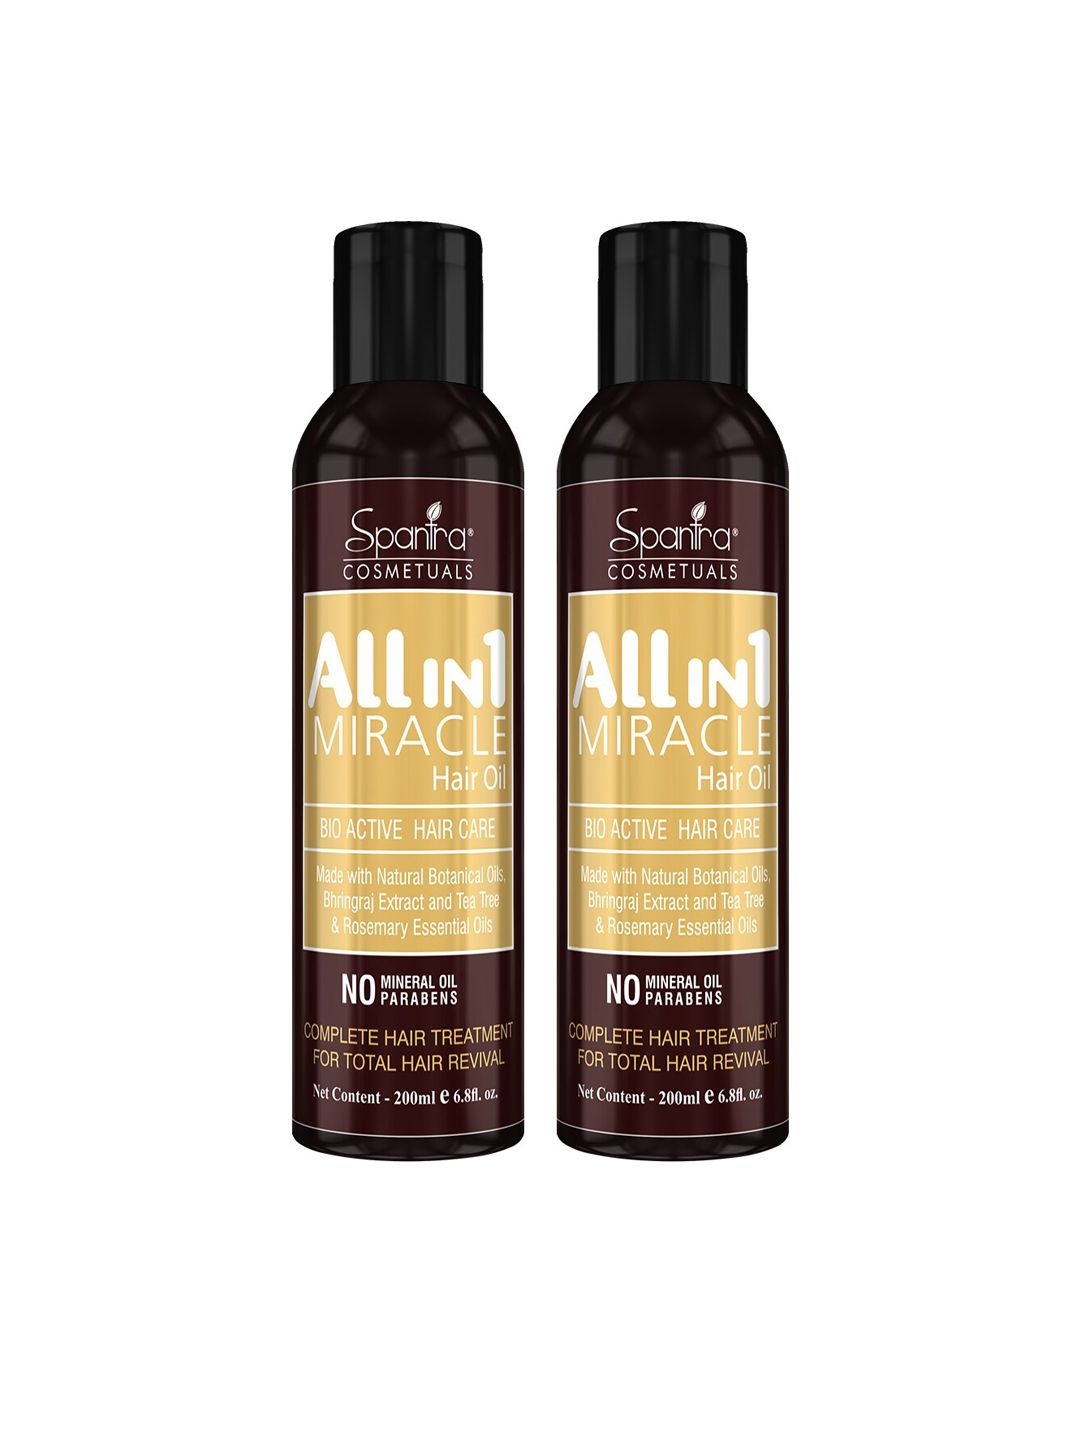 Spantra Set of 2 All in 1 Miracle Hair Oil - 200 ml each Price in India